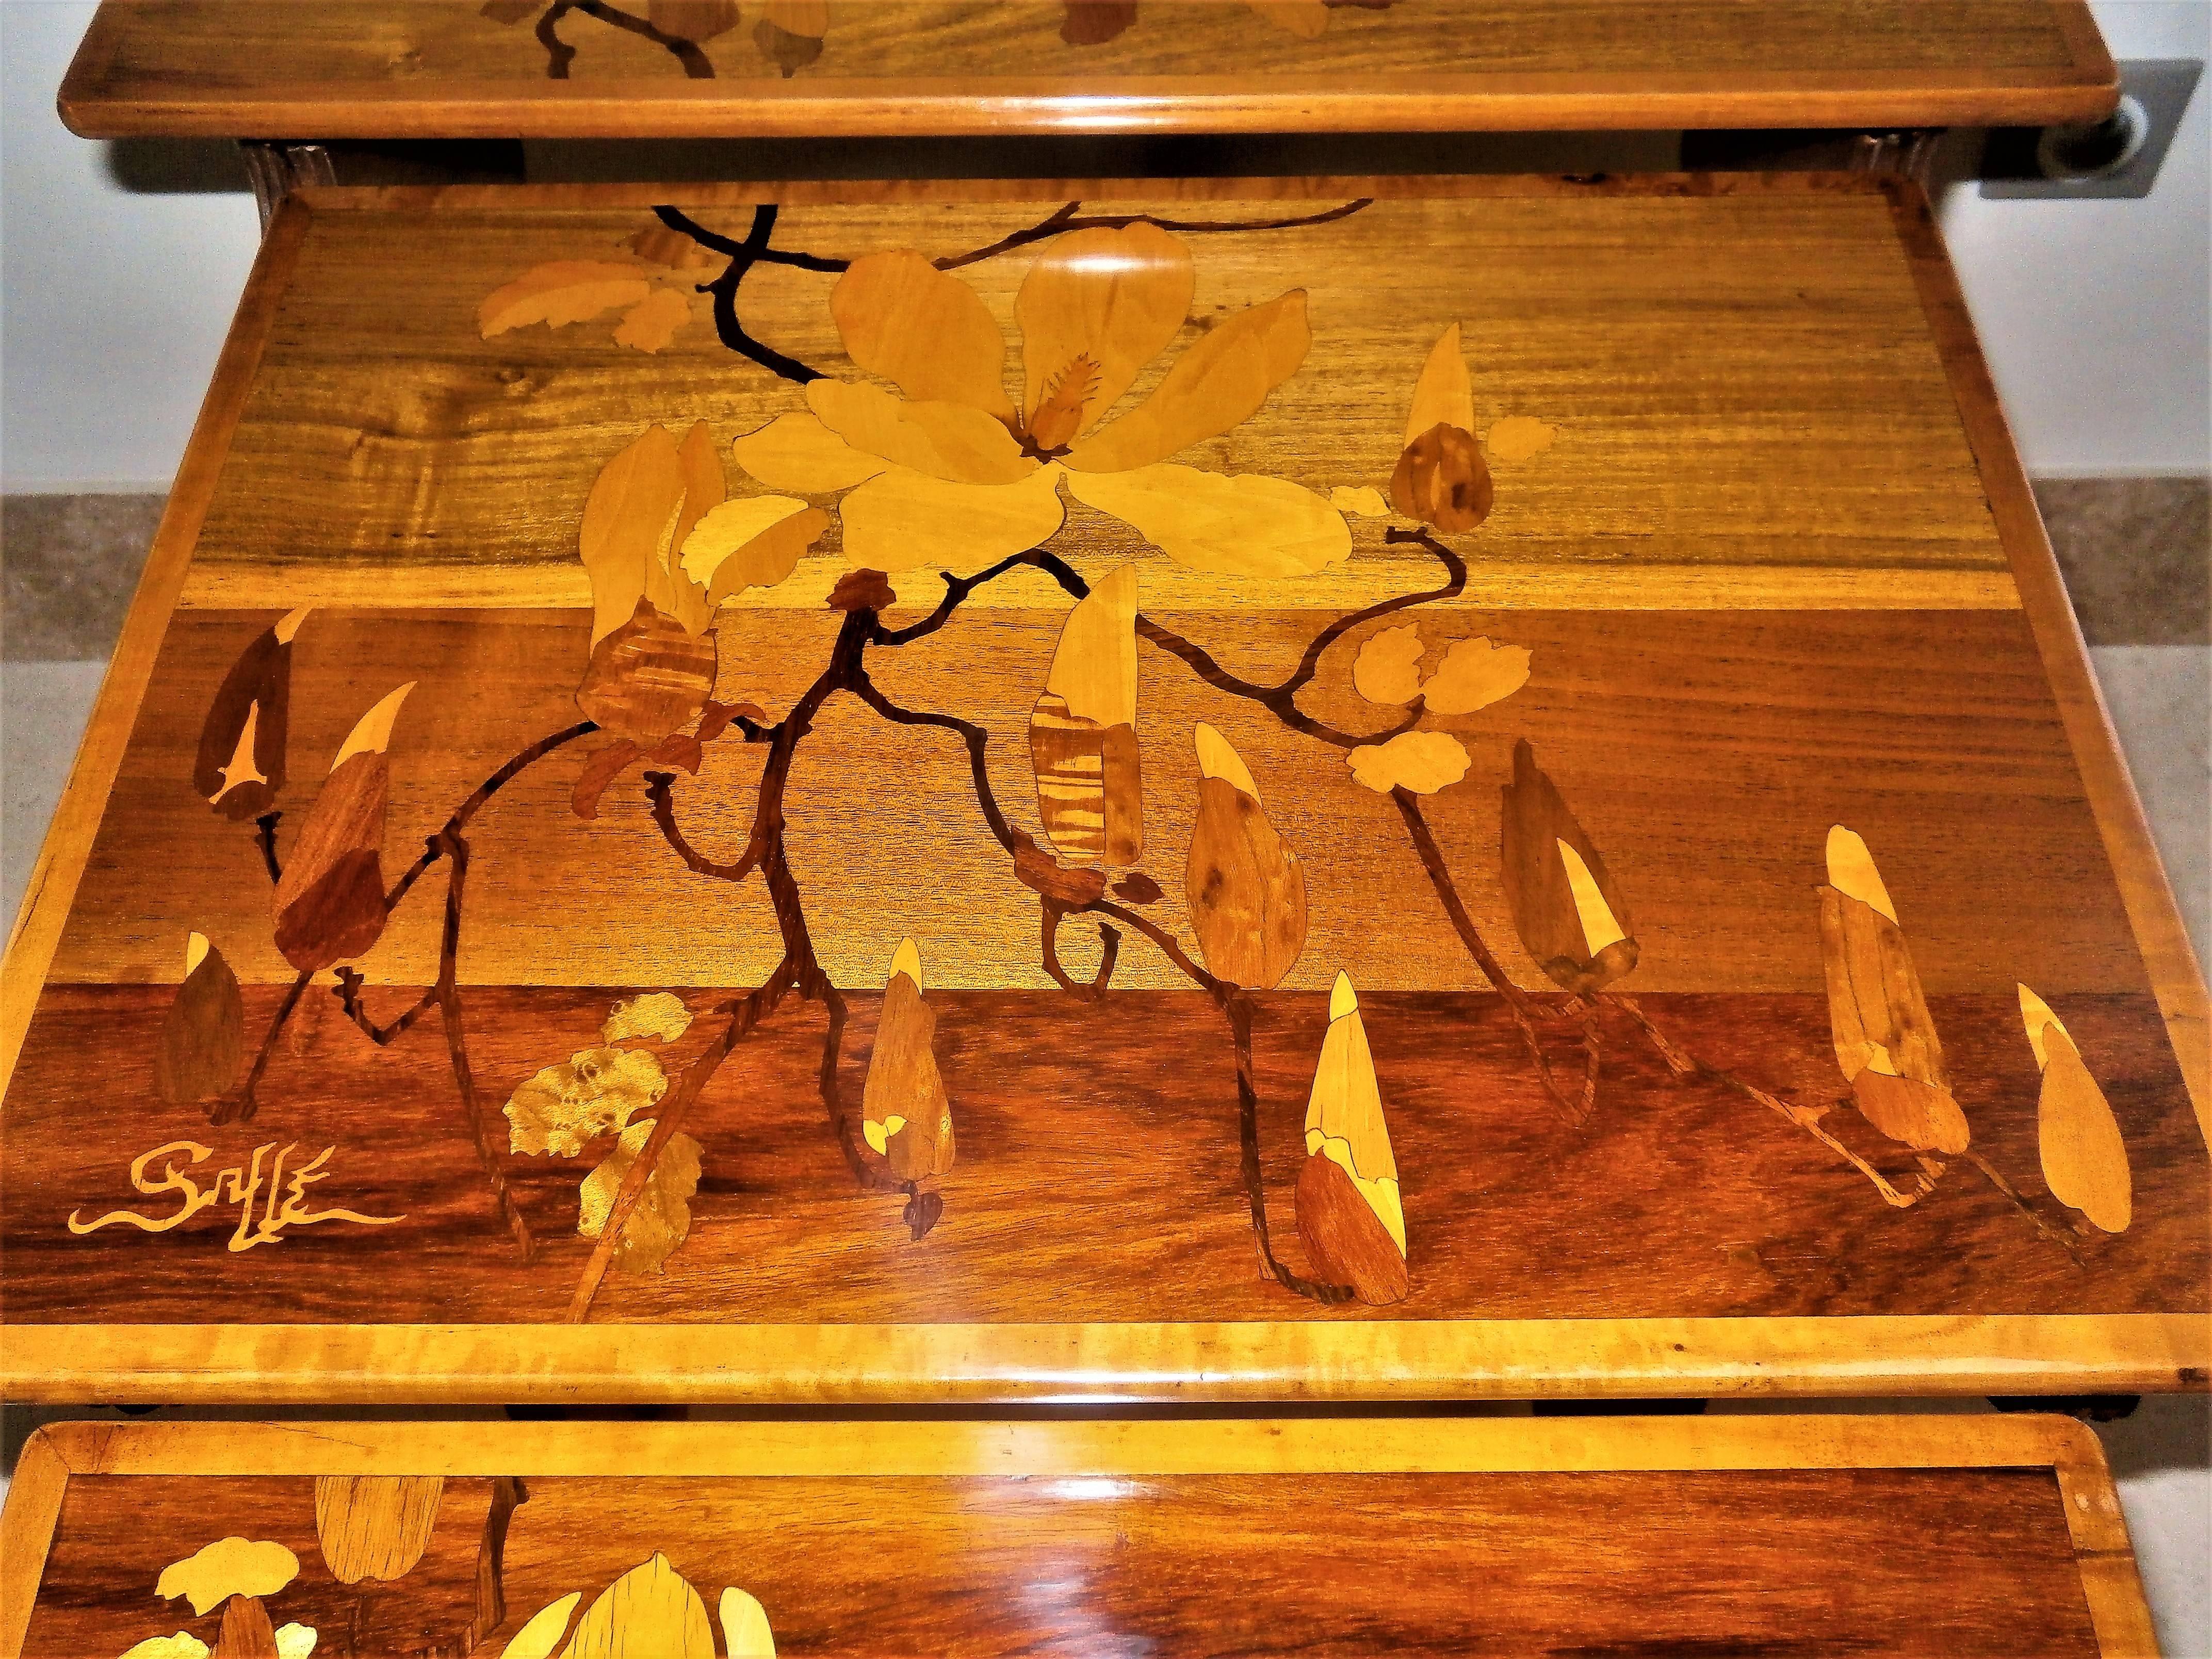 Early 20th Century Stunning Art Nouveau Marquetry Nesting Tables Signed by Gallé